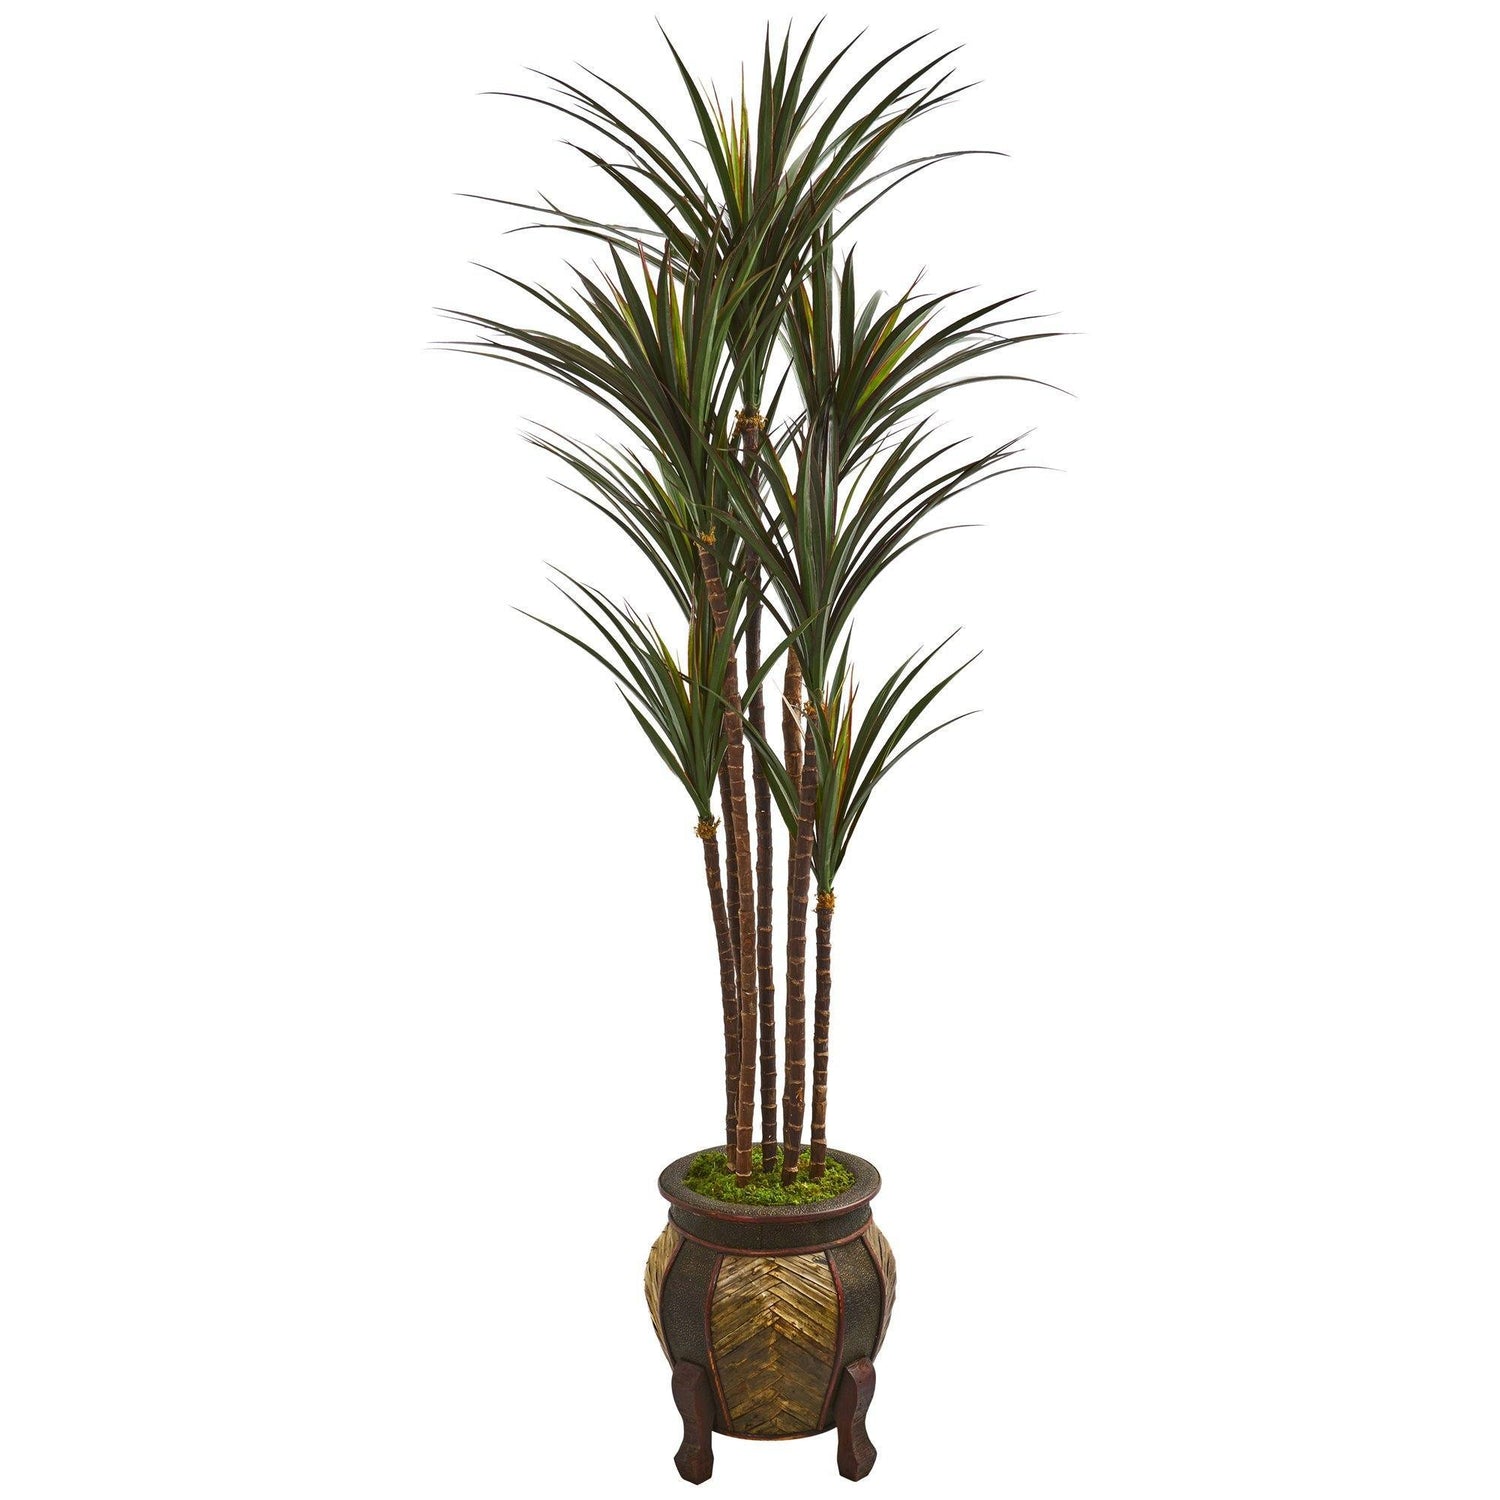 62” Giant Yucca Artificial Tree in Decorative Planter UV Resistant